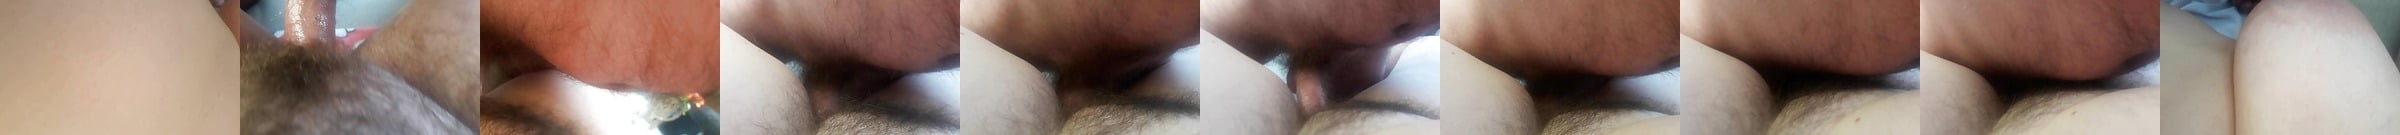 Slut Wife Claire Fucked By Friend In Her Hairy Pussy Xhamster 